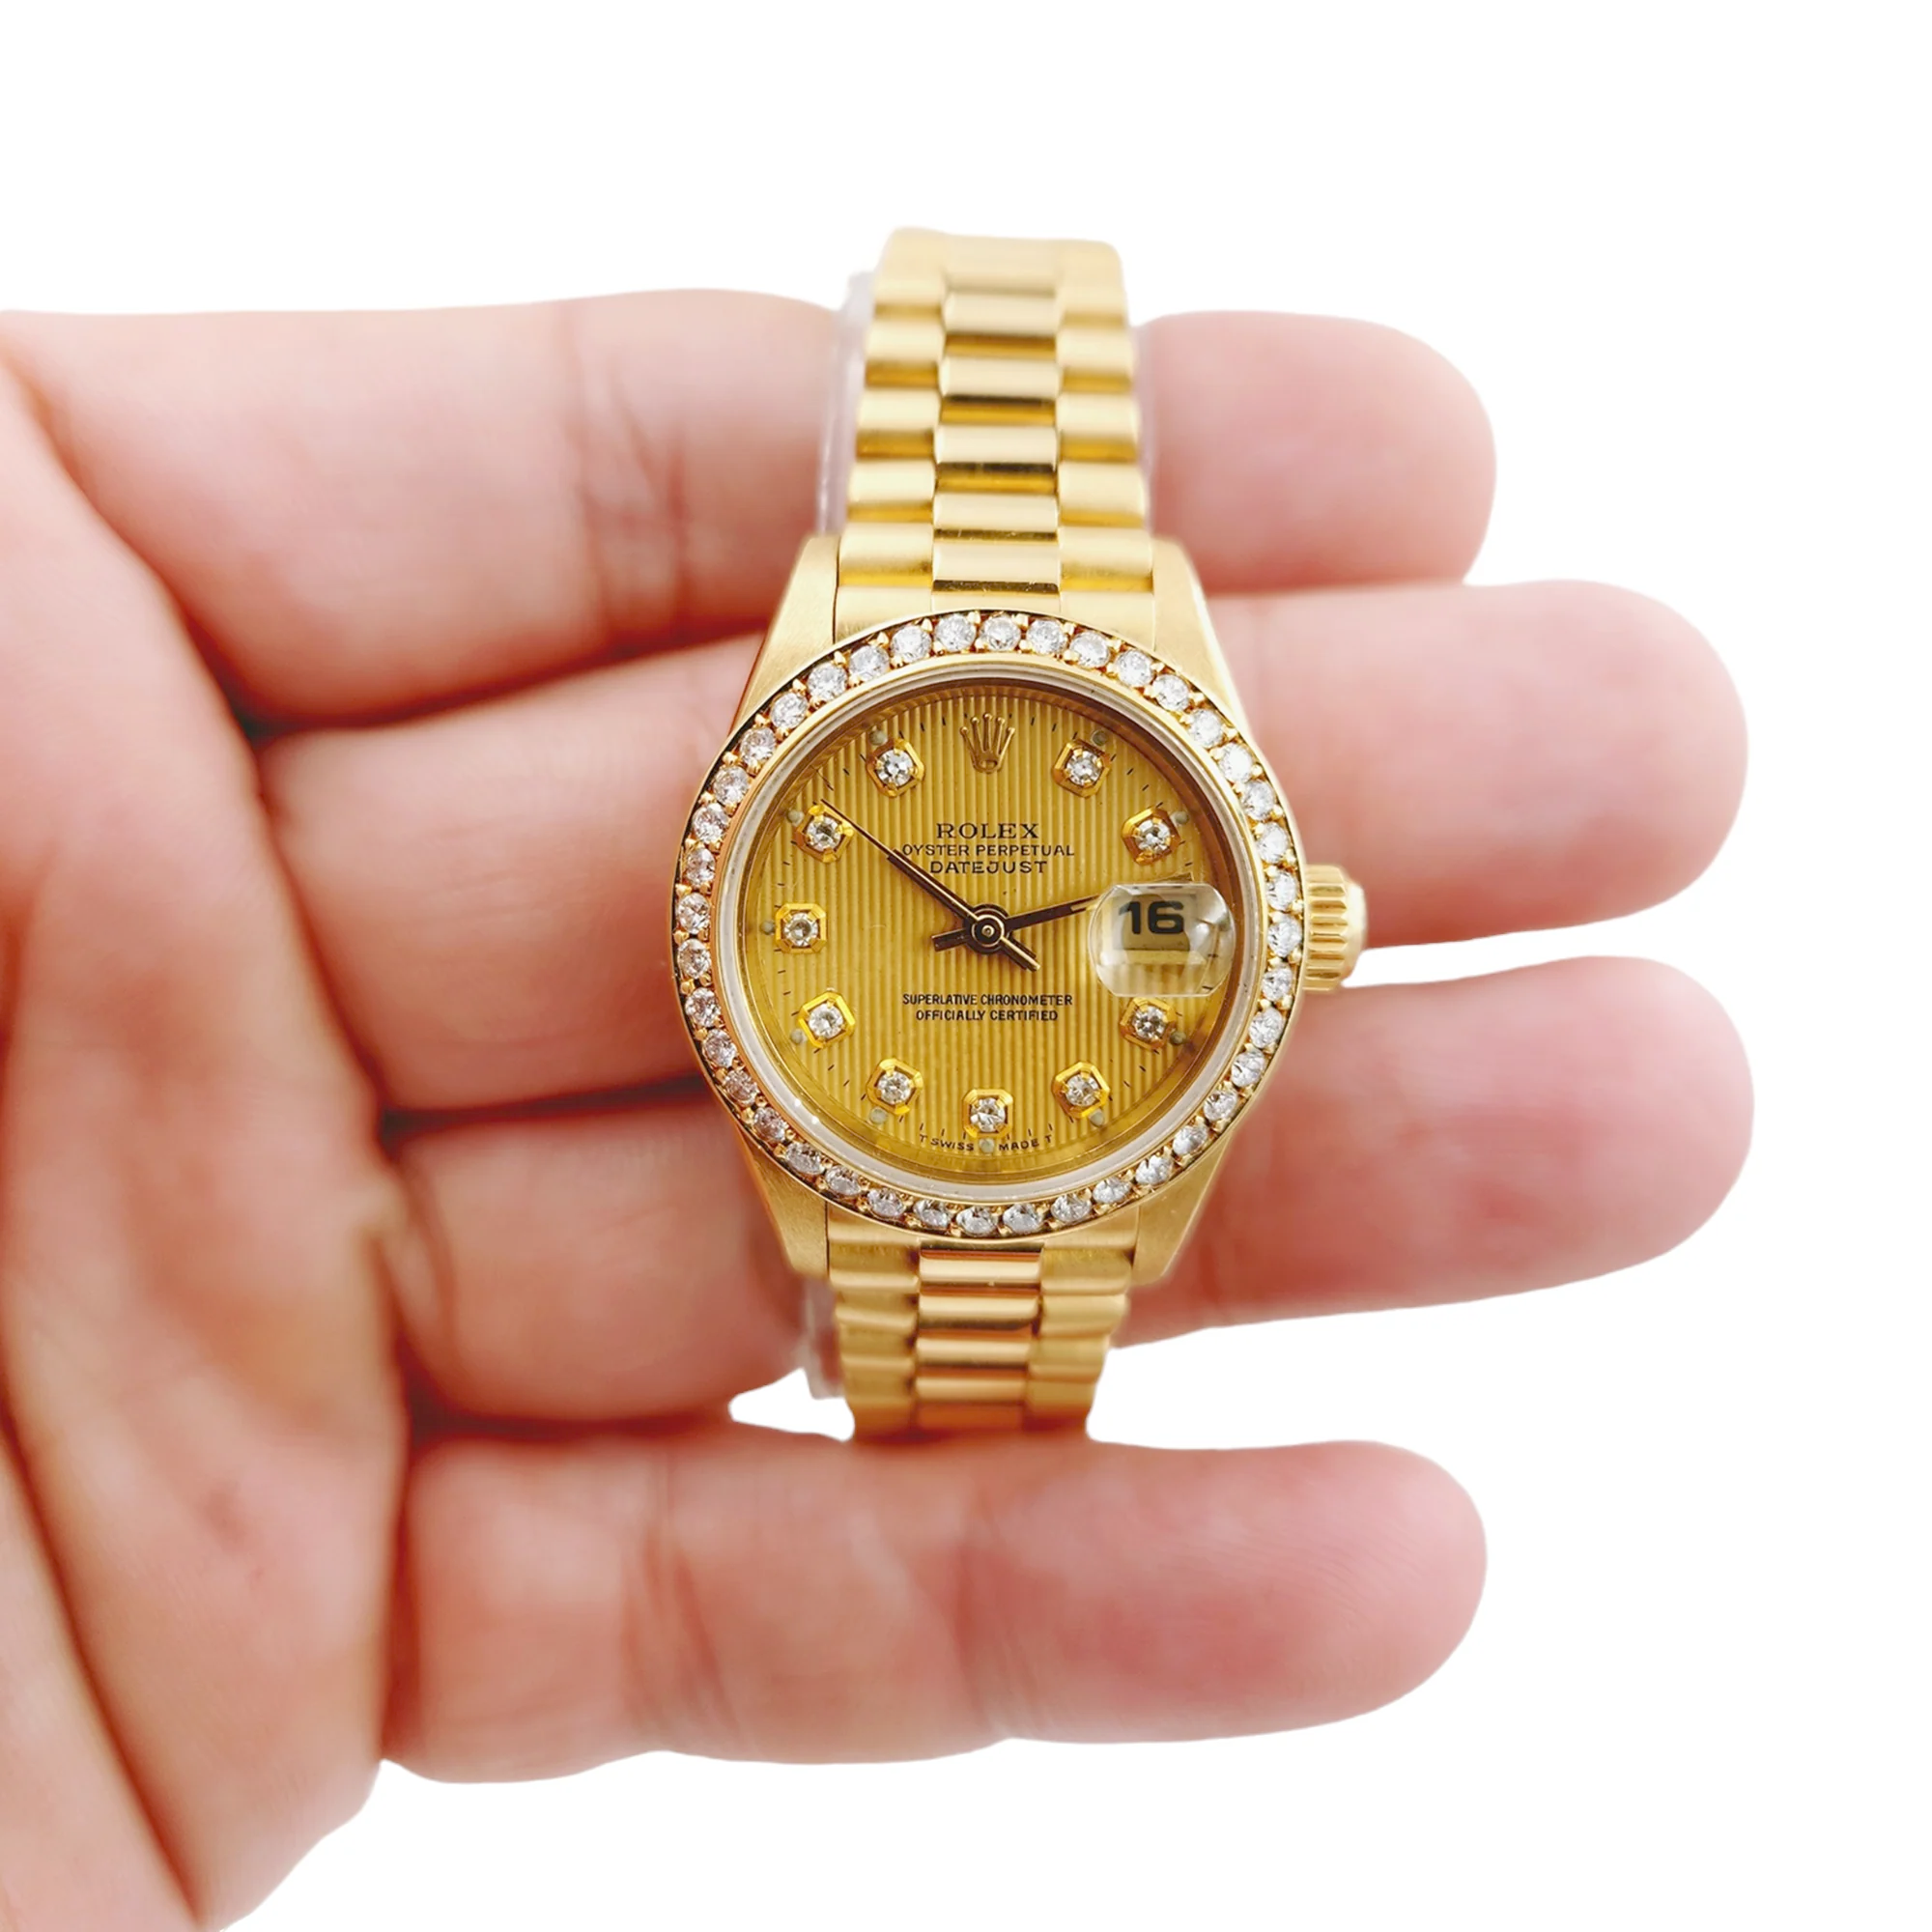 Ladies Rolex 26mm Presidential 18K Solid Yellow Gold Wristwatch w/ Gold Tapestry Diamond Dial & Diamond Bezel. (Pre-Owned 69174)